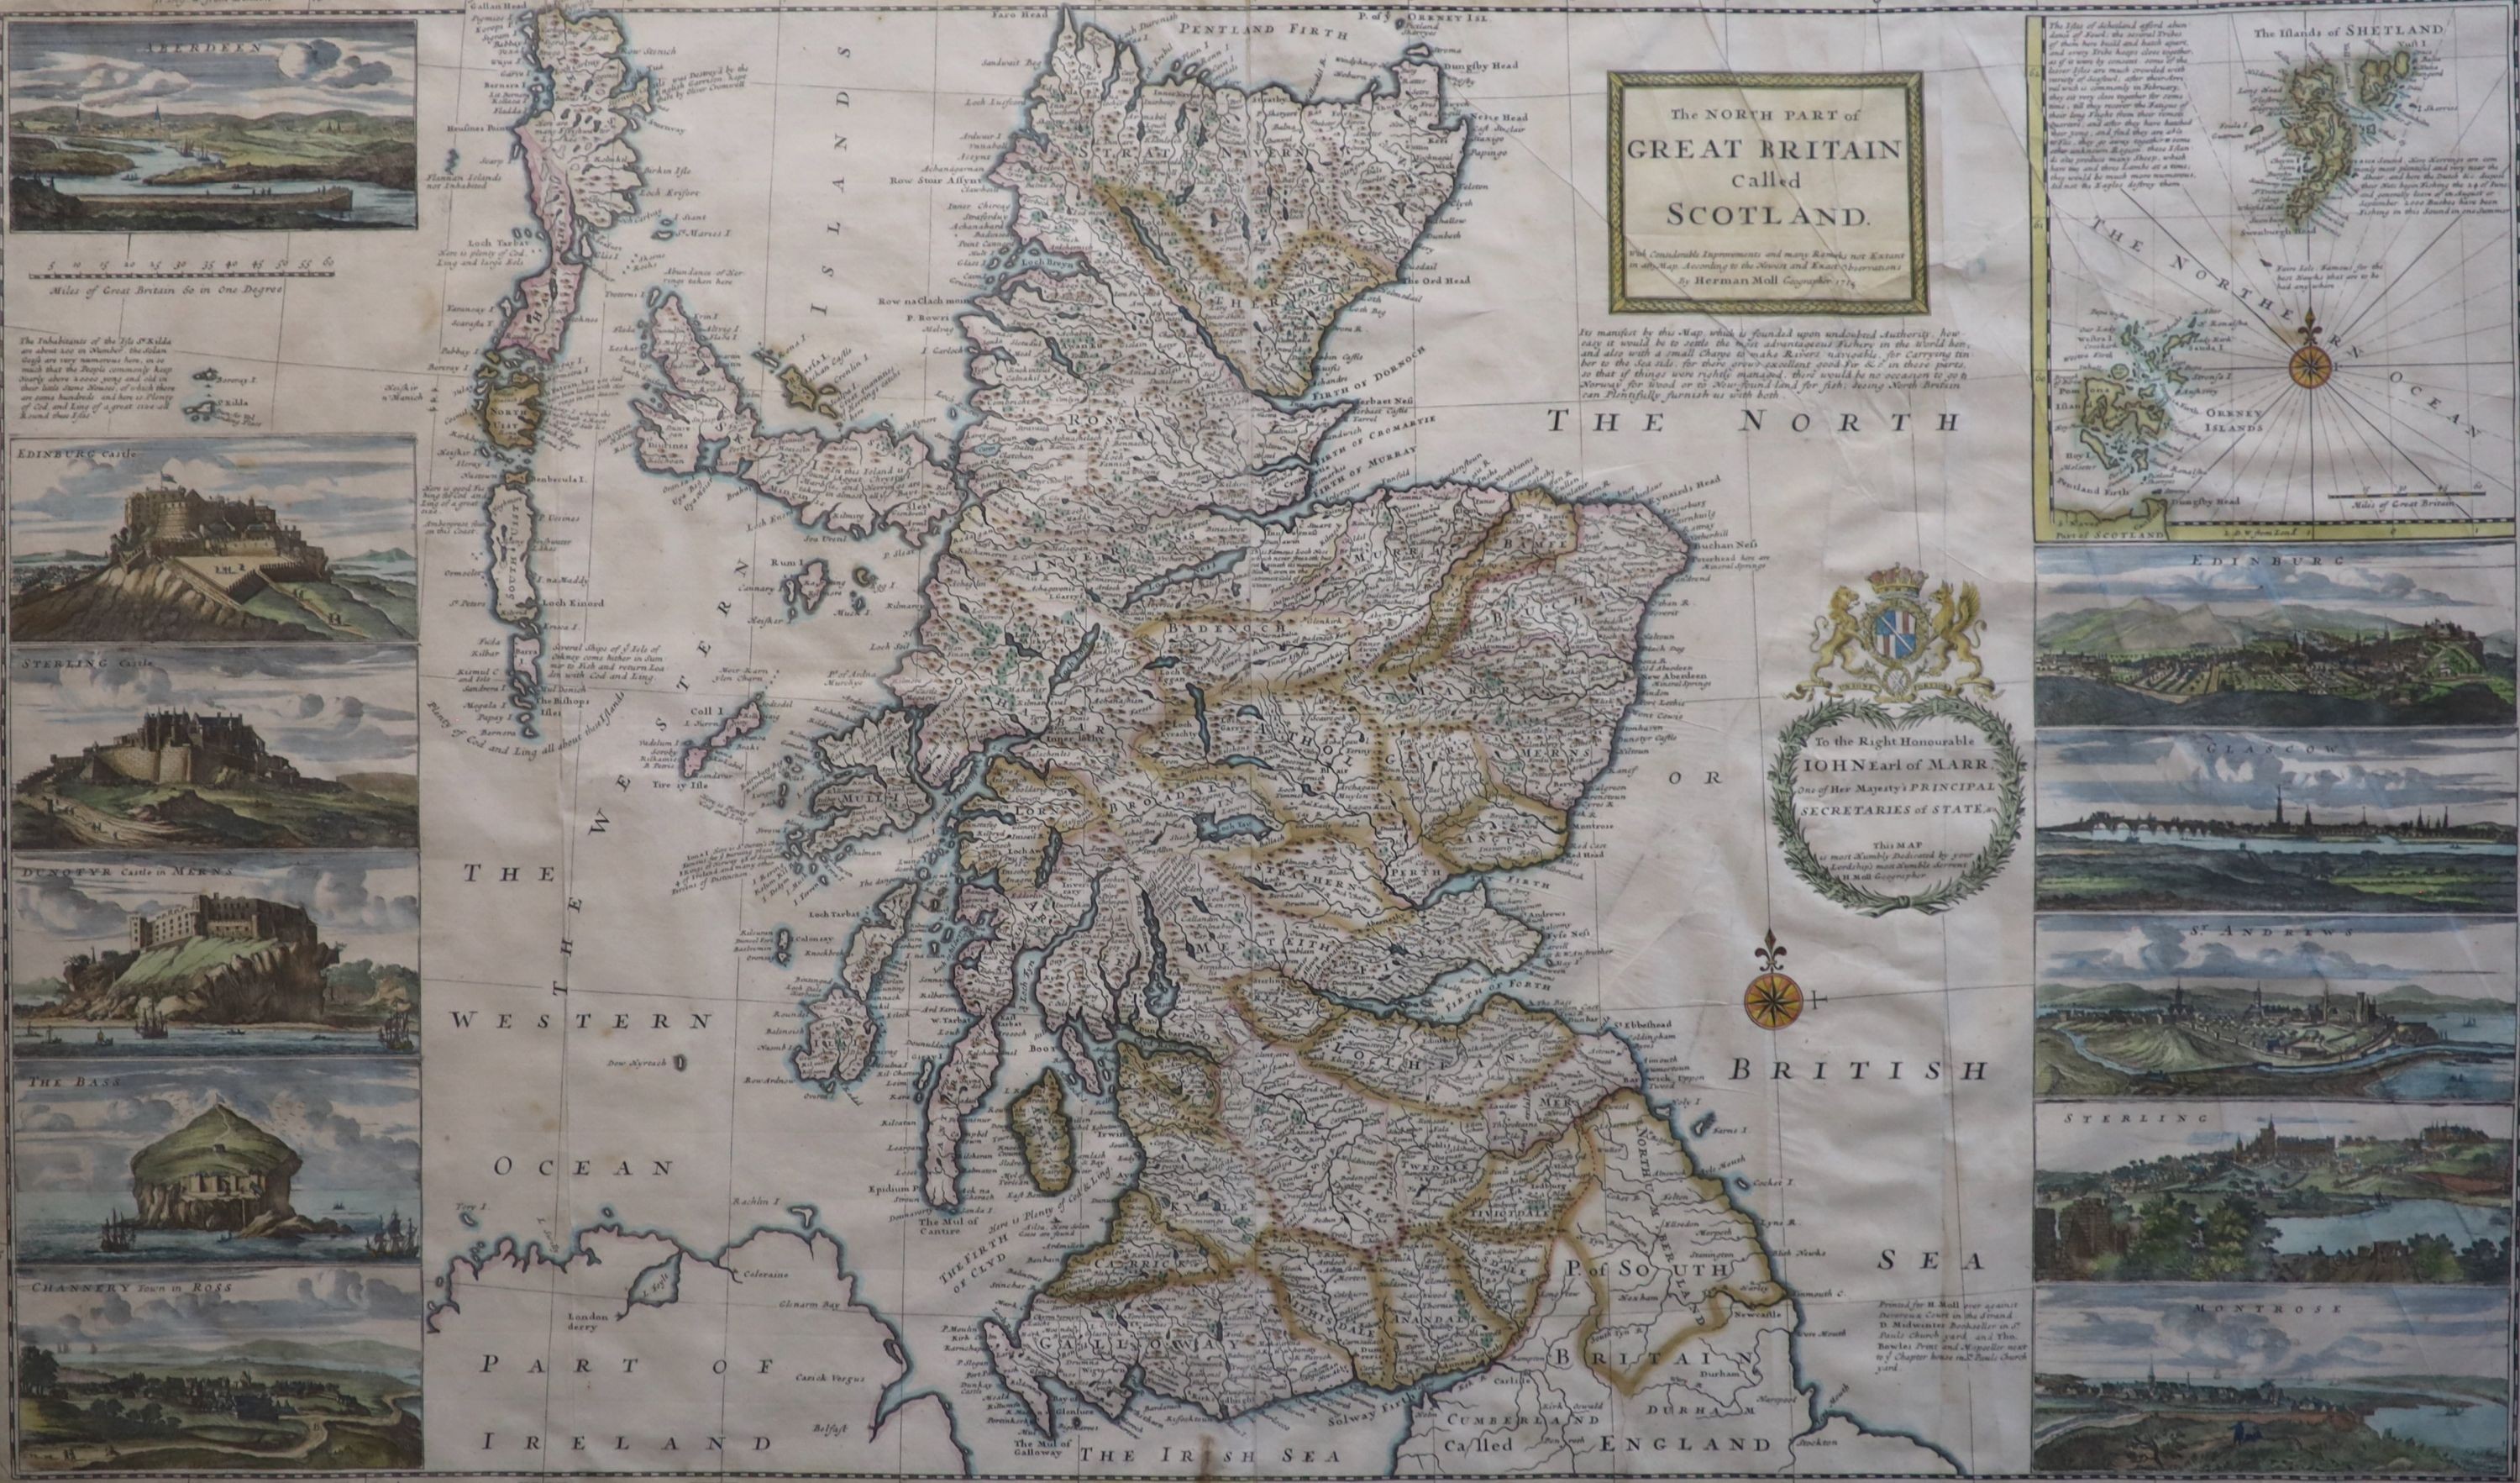 Herman Moll (1654-1732), 'The North Part of Great Britain called Scotland' 1714, coloured engraving, 60.5 x 101cm